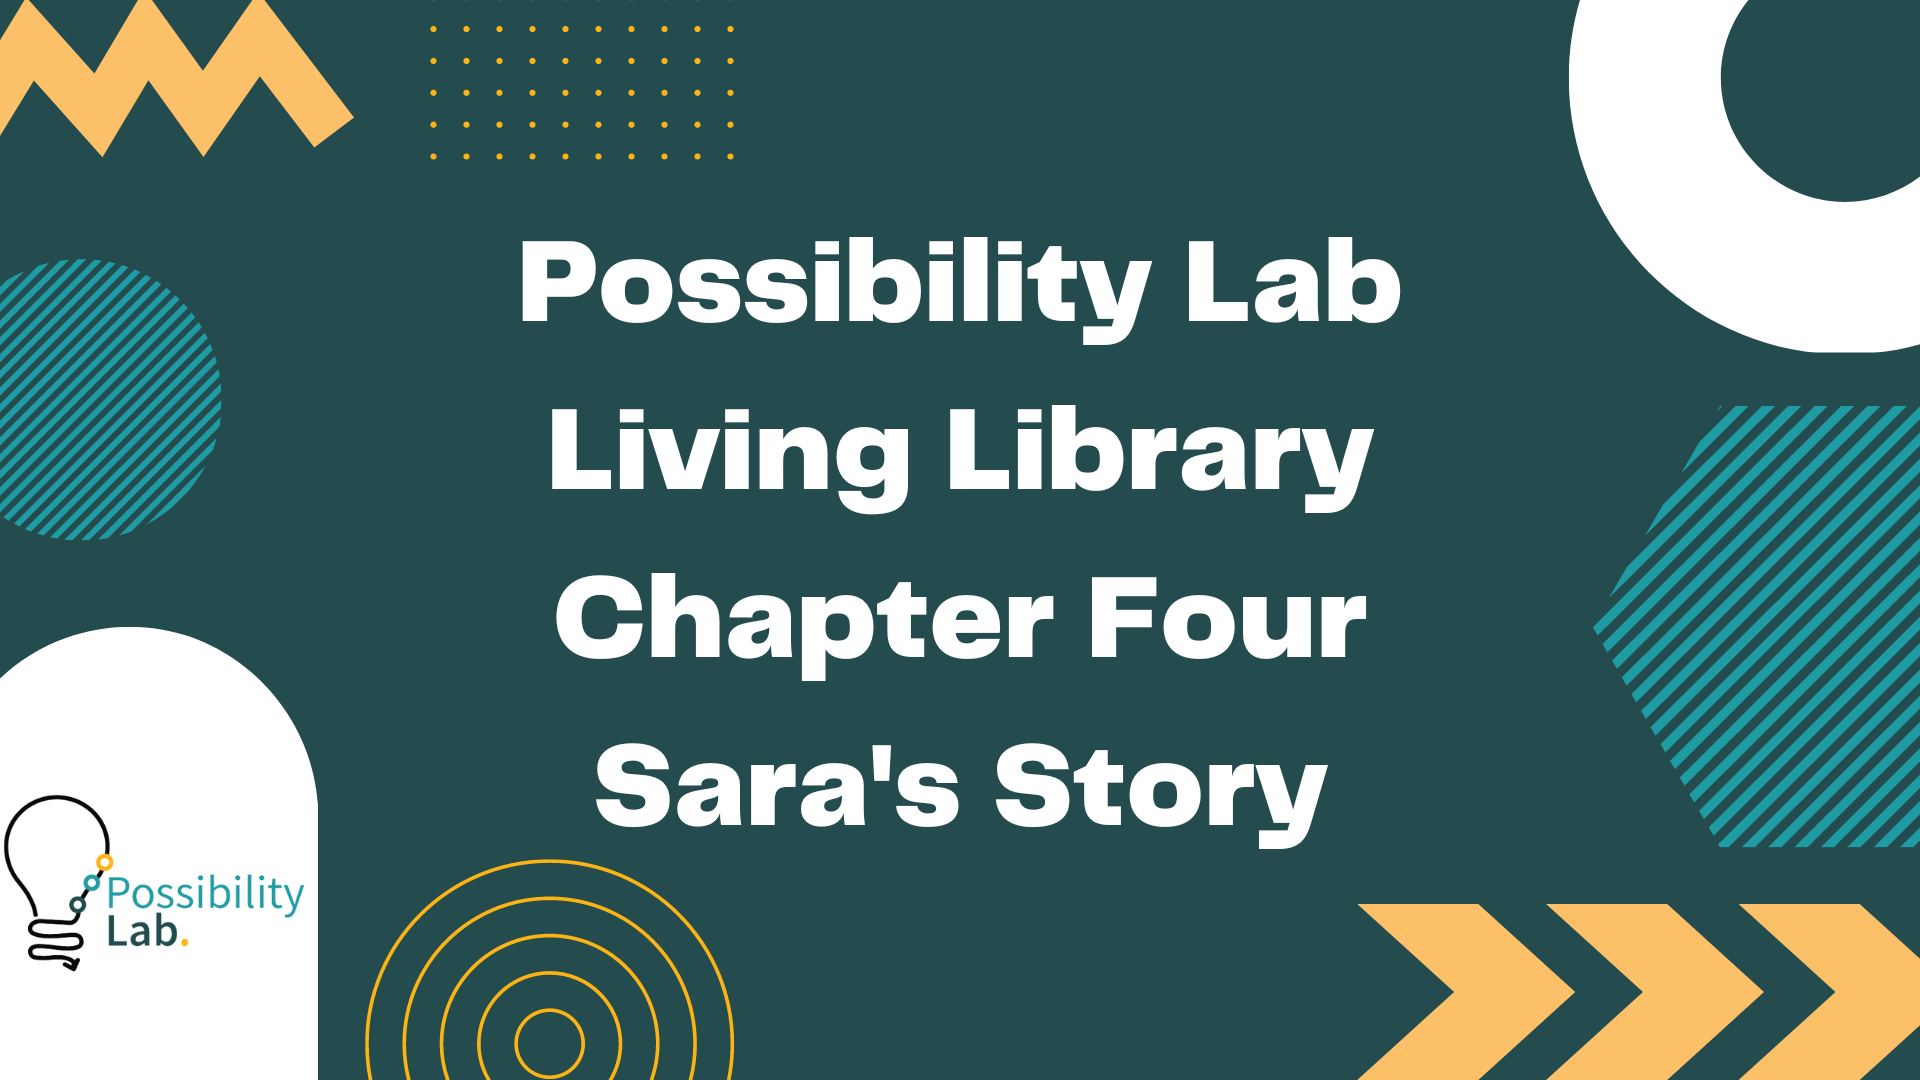 A slide from our living library videos. It has a green background and squiggle designs in white, lighter green and orange. The possibility lab logo is on the bottom left and text on the slide reads Possibility Lab Living Library Chapter Four Sara's Story